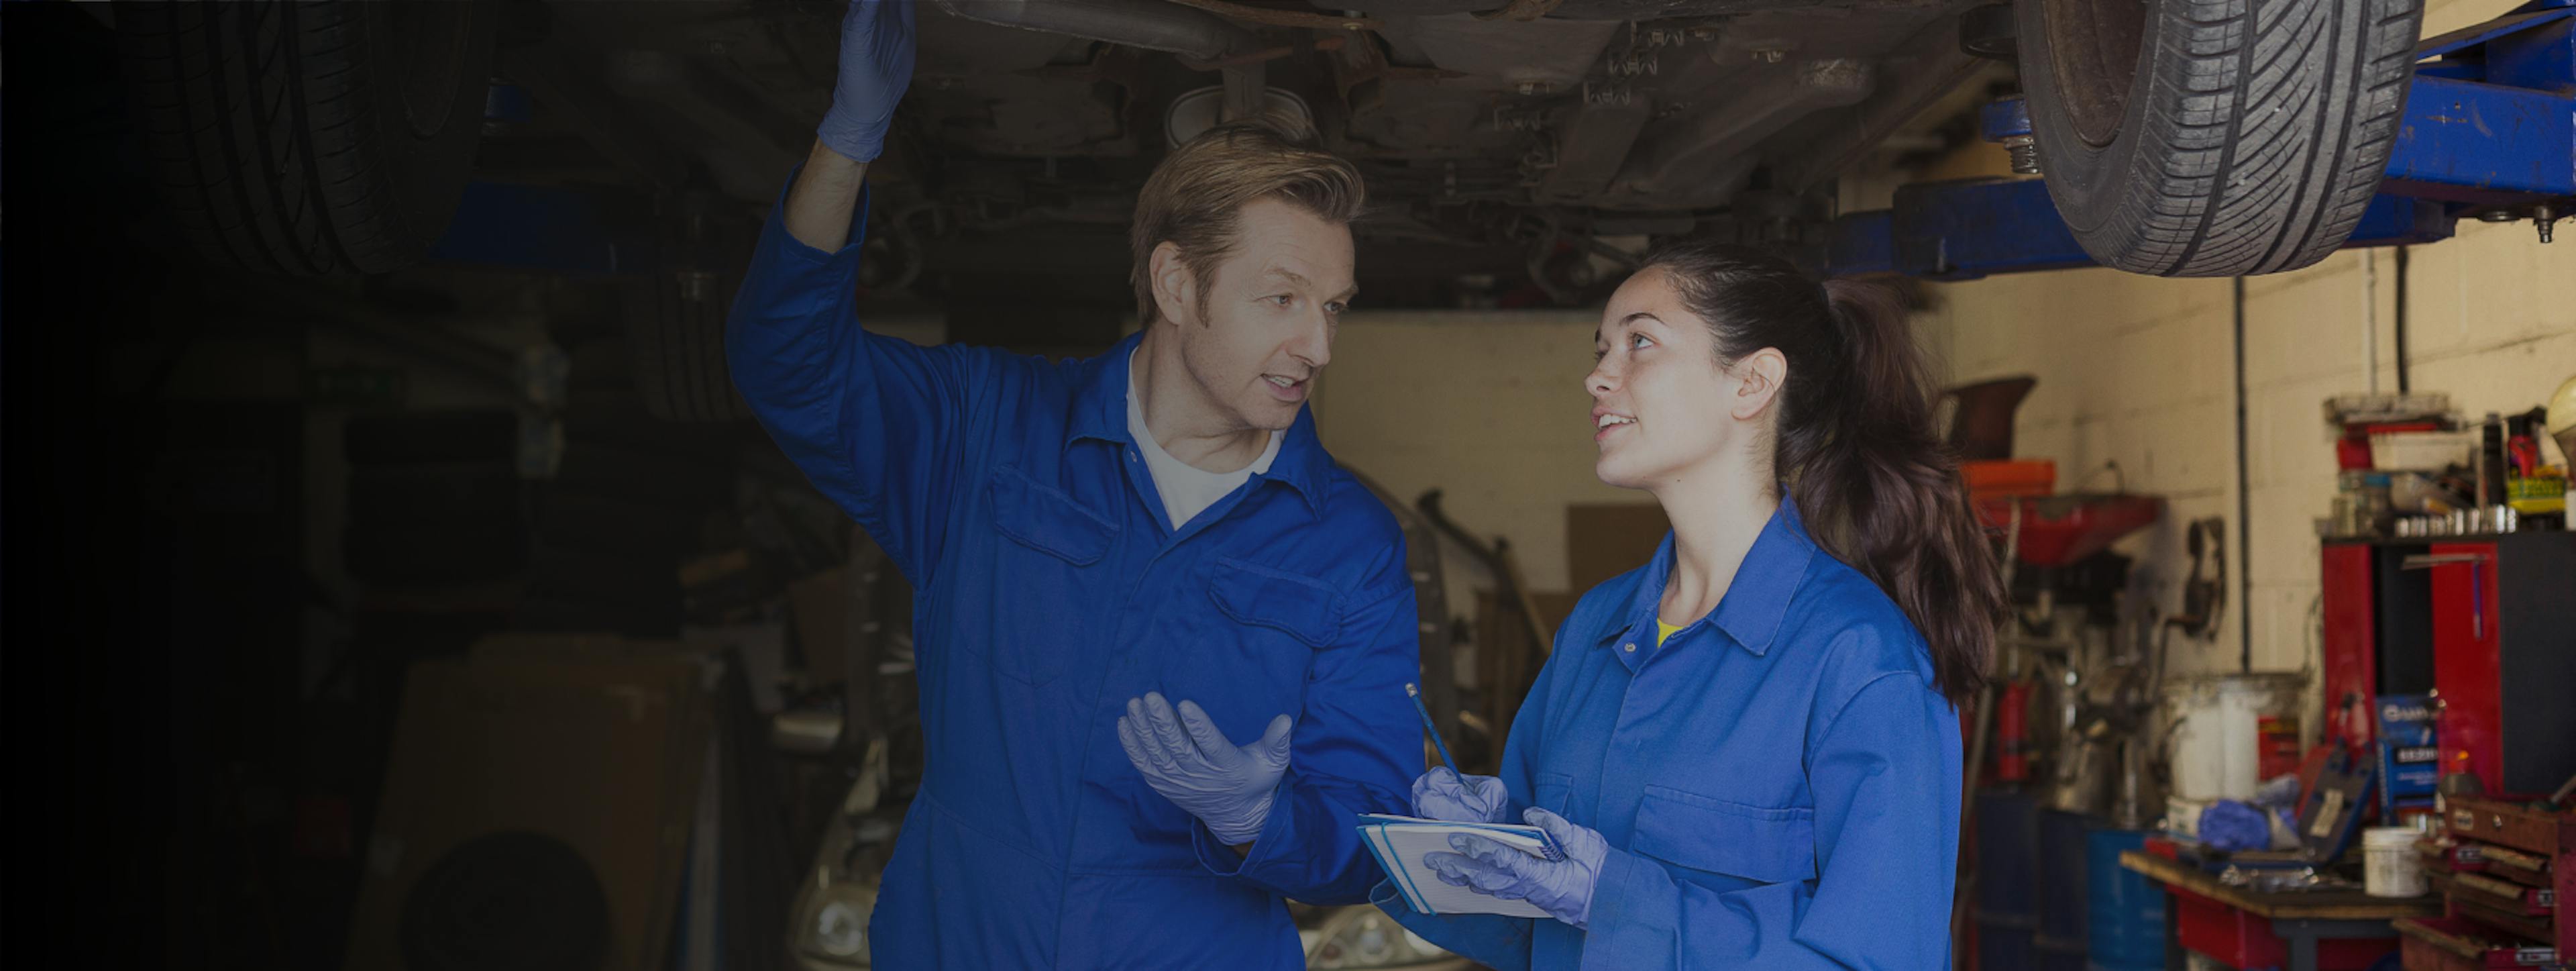 A male and female mechanic looking at the underside of a car